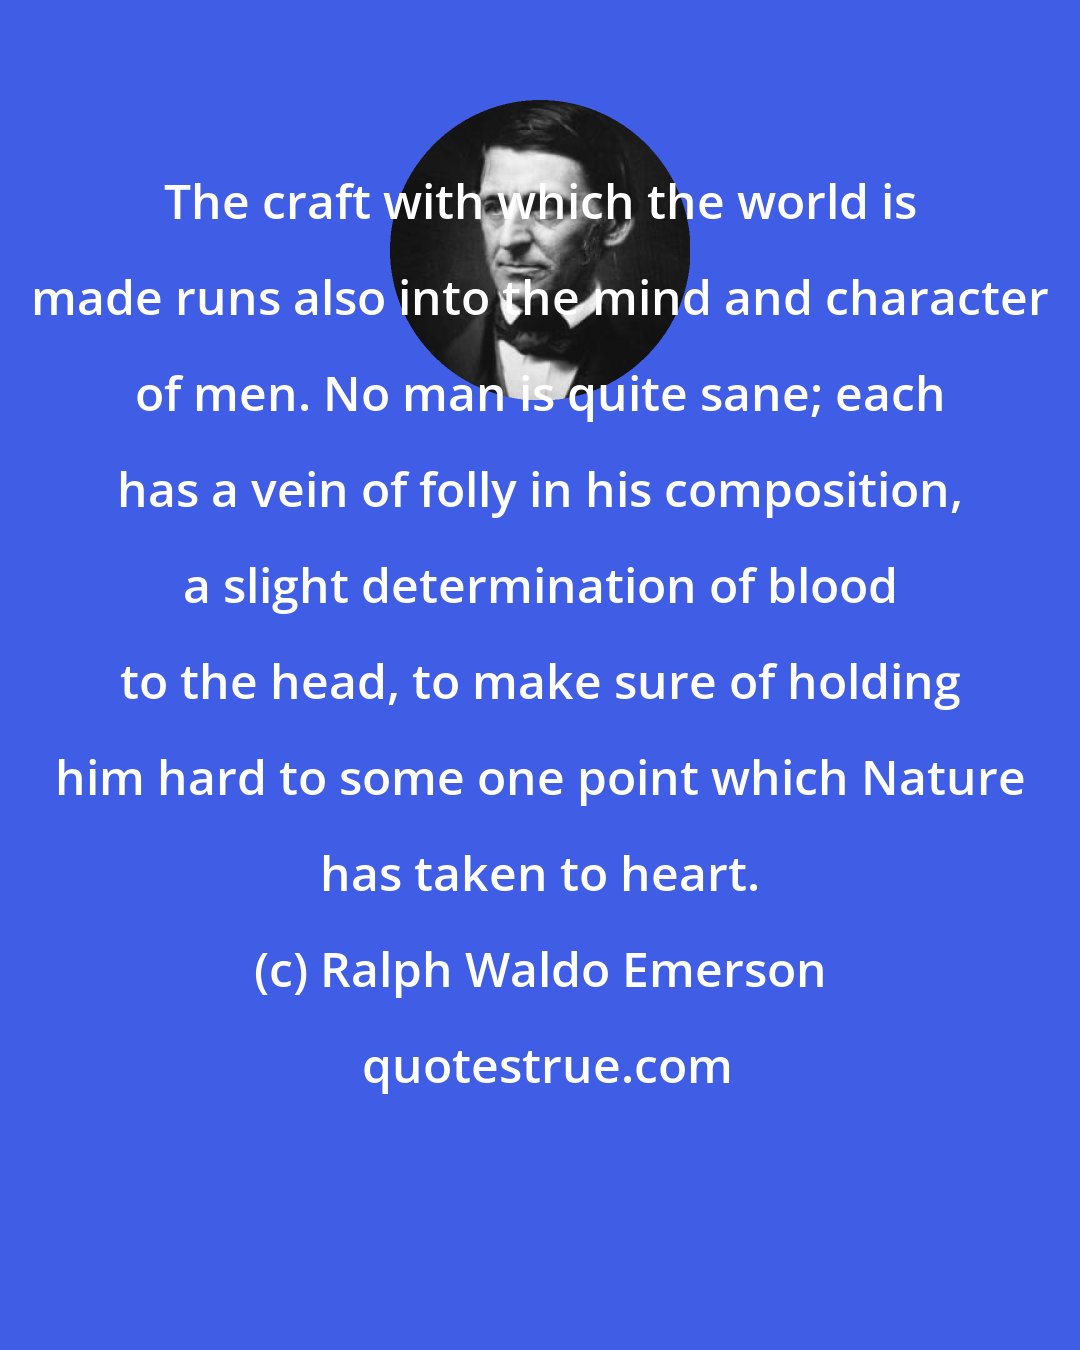 Ralph Waldo Emerson: The craft with which the world is made runs also into the mind and character of men. No man is quite sane; each has a vein of folly in his composition, a slight determination of blood to the head, to make sure of holding him hard to some one point which Nature has taken to heart.